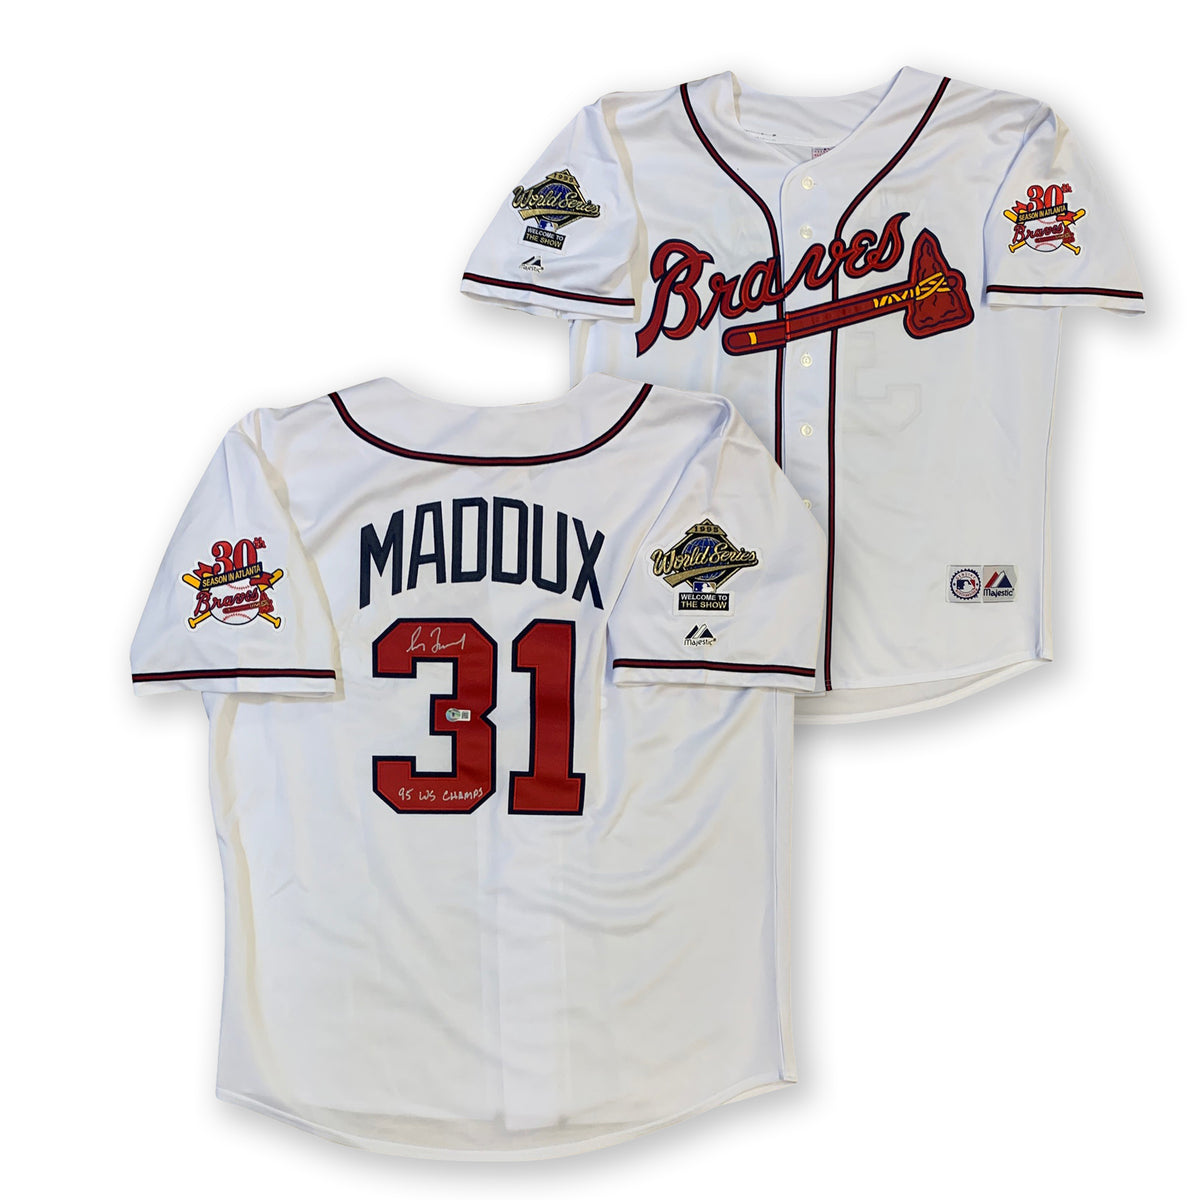 Greg Maddux Atlanta Braves Player Issued Signed Jersey 1997 Throwback Auto